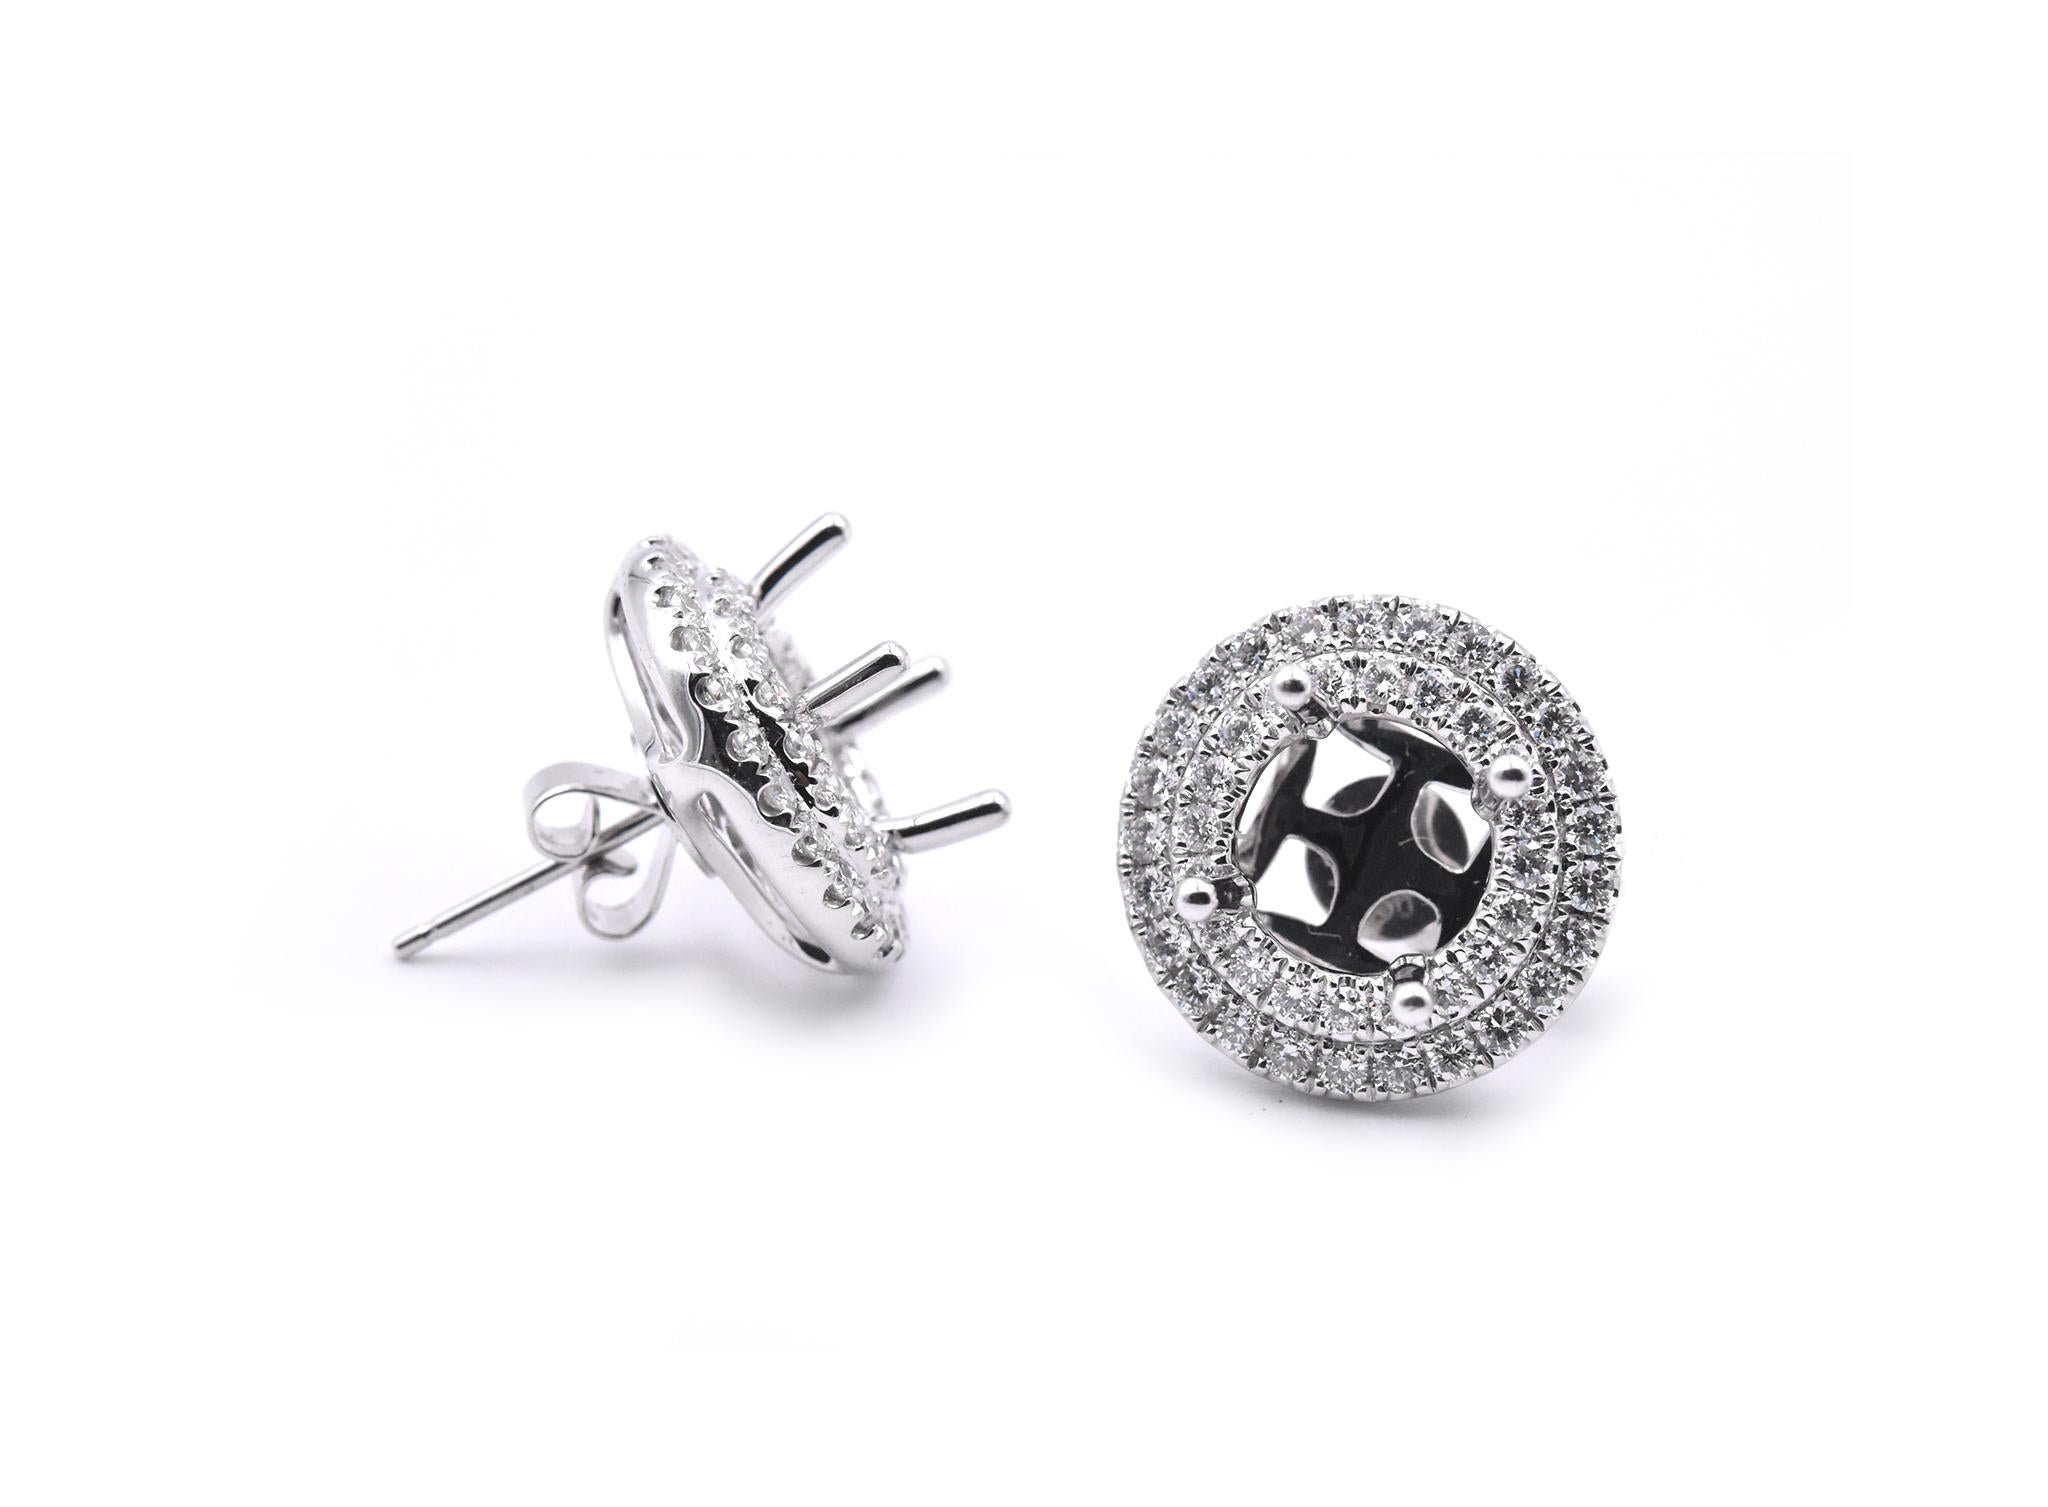 Designer: custom designed
Material: 18k white gold
Diamonds: 90 round brilliant cuts = 1.46cttw
Color: G
Clarity: VS2-SI1
Dimensions: earrings measure 16mm in diameter, jackets can hold an 8.5mm center stone or a 2.50 carat diamond each
Fastenings: